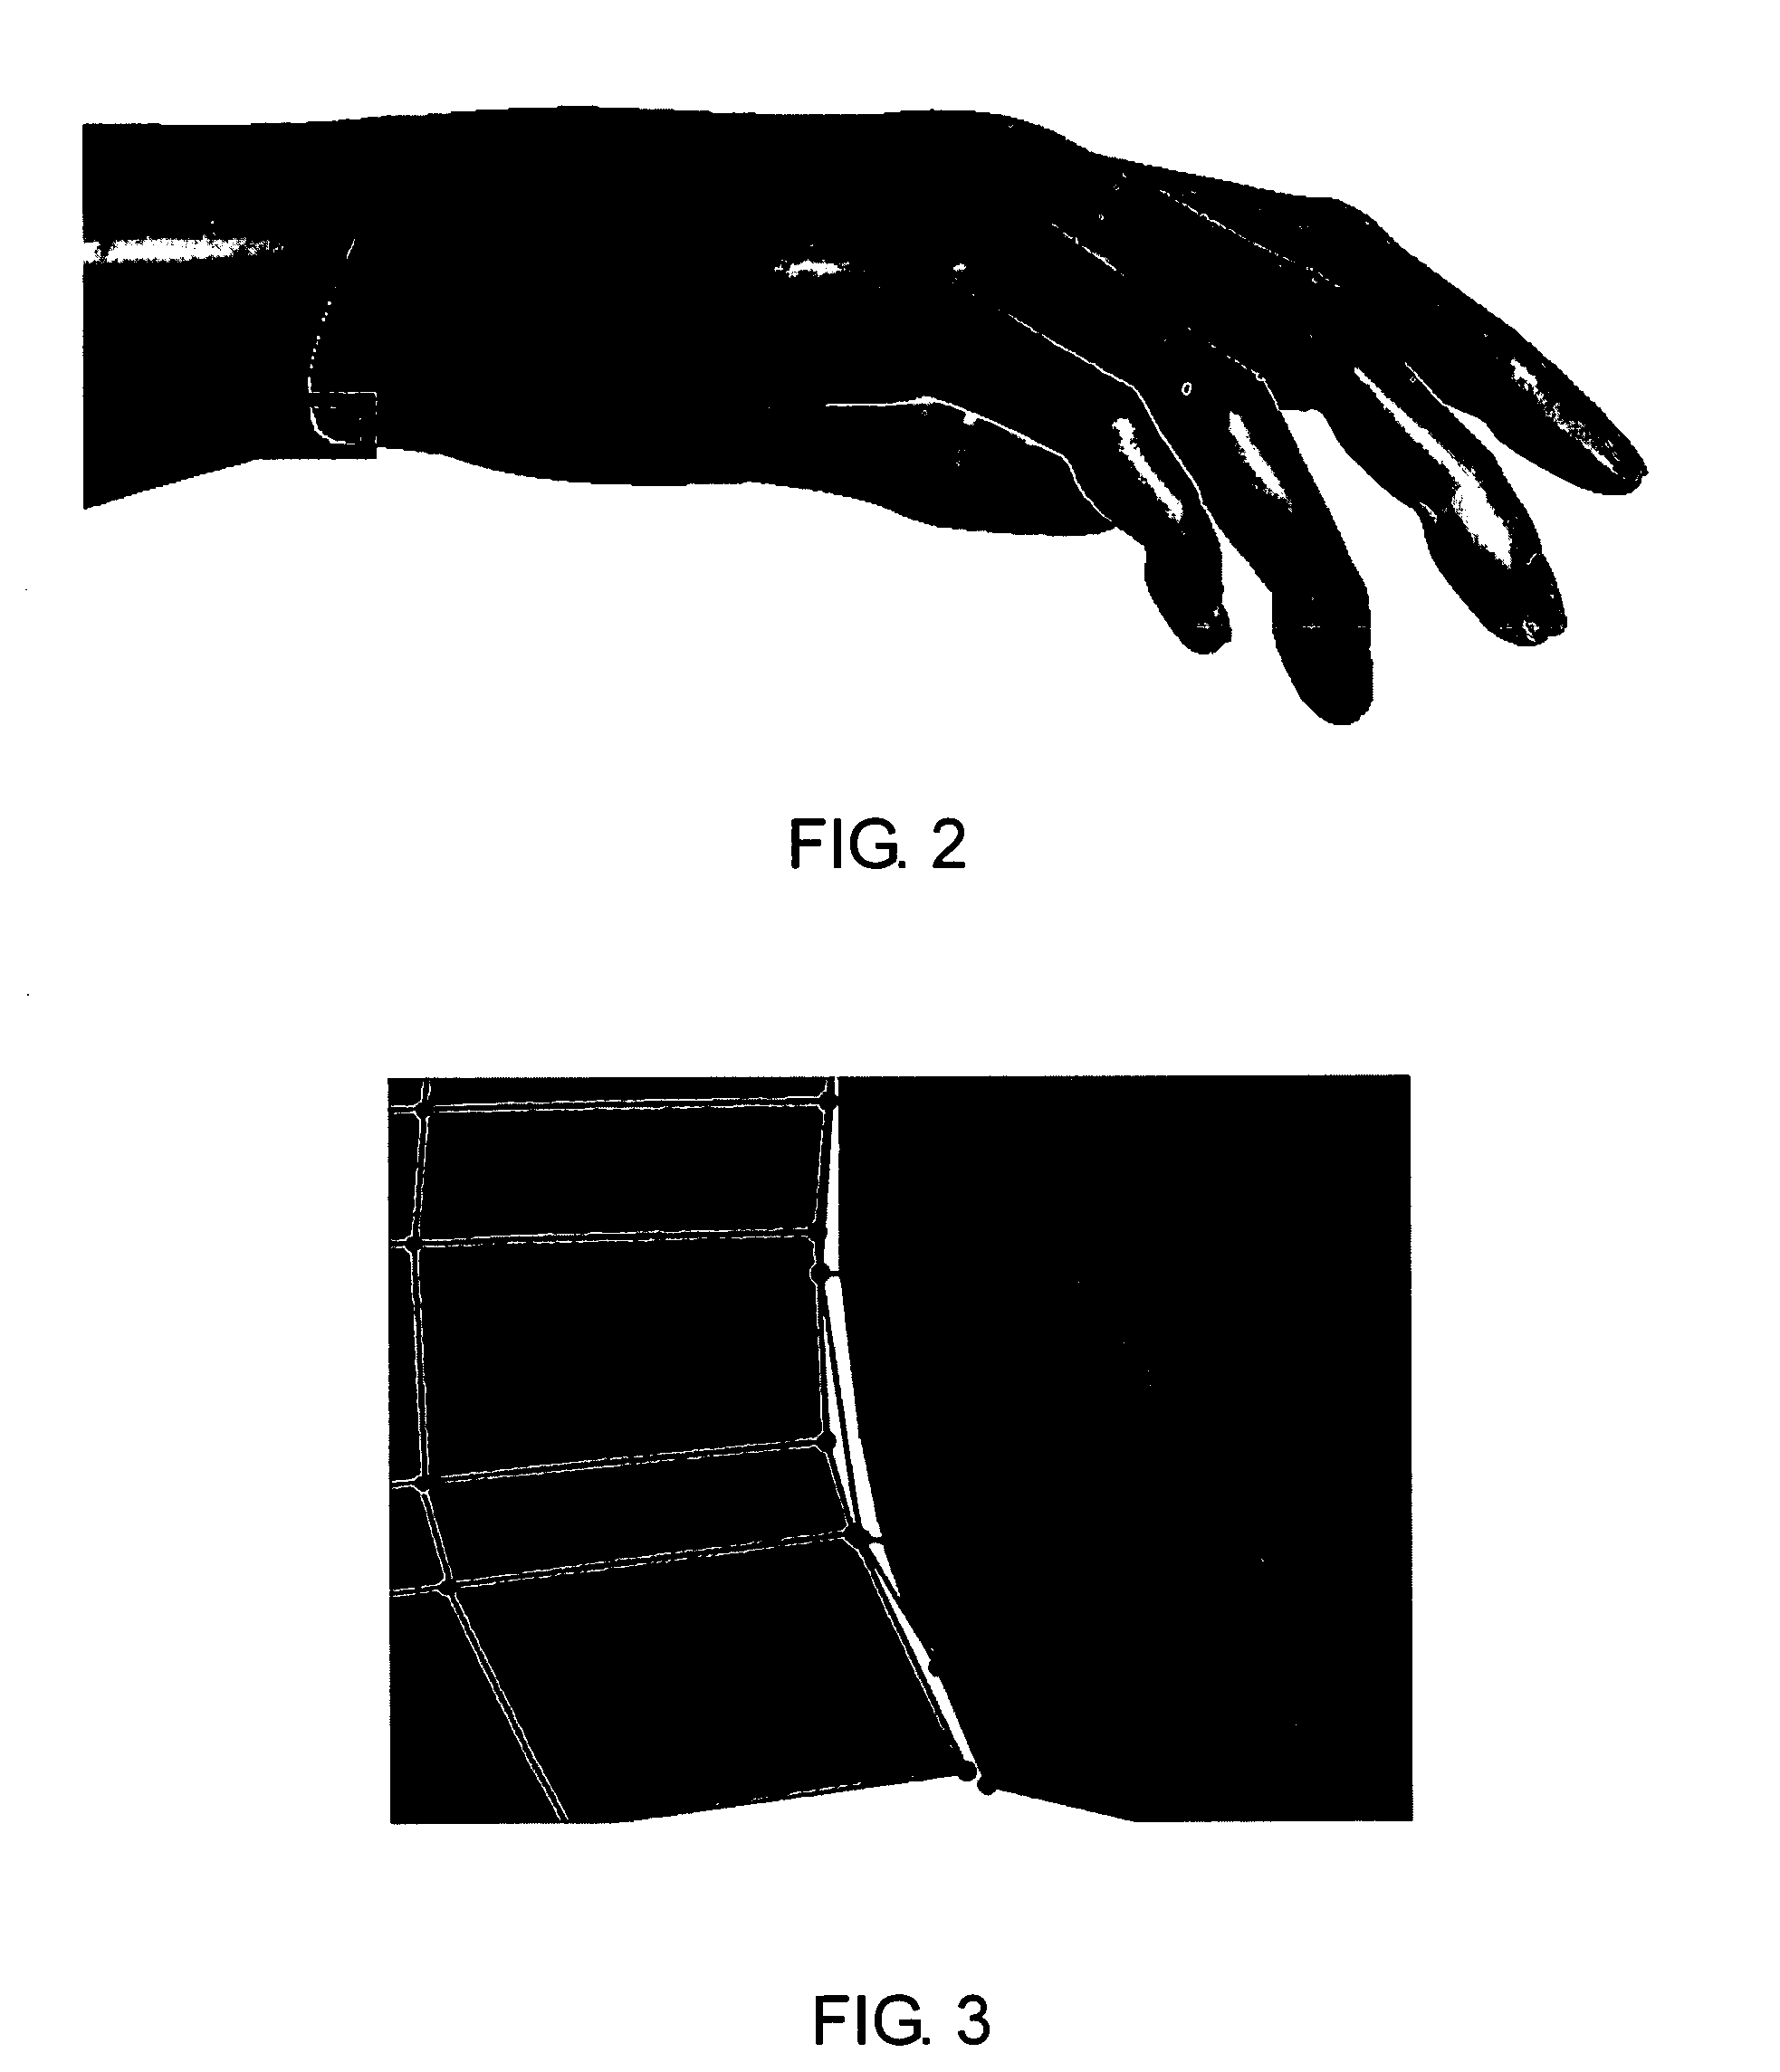 System and method for defining T-spline and T-NURCC surfaces using local refinements